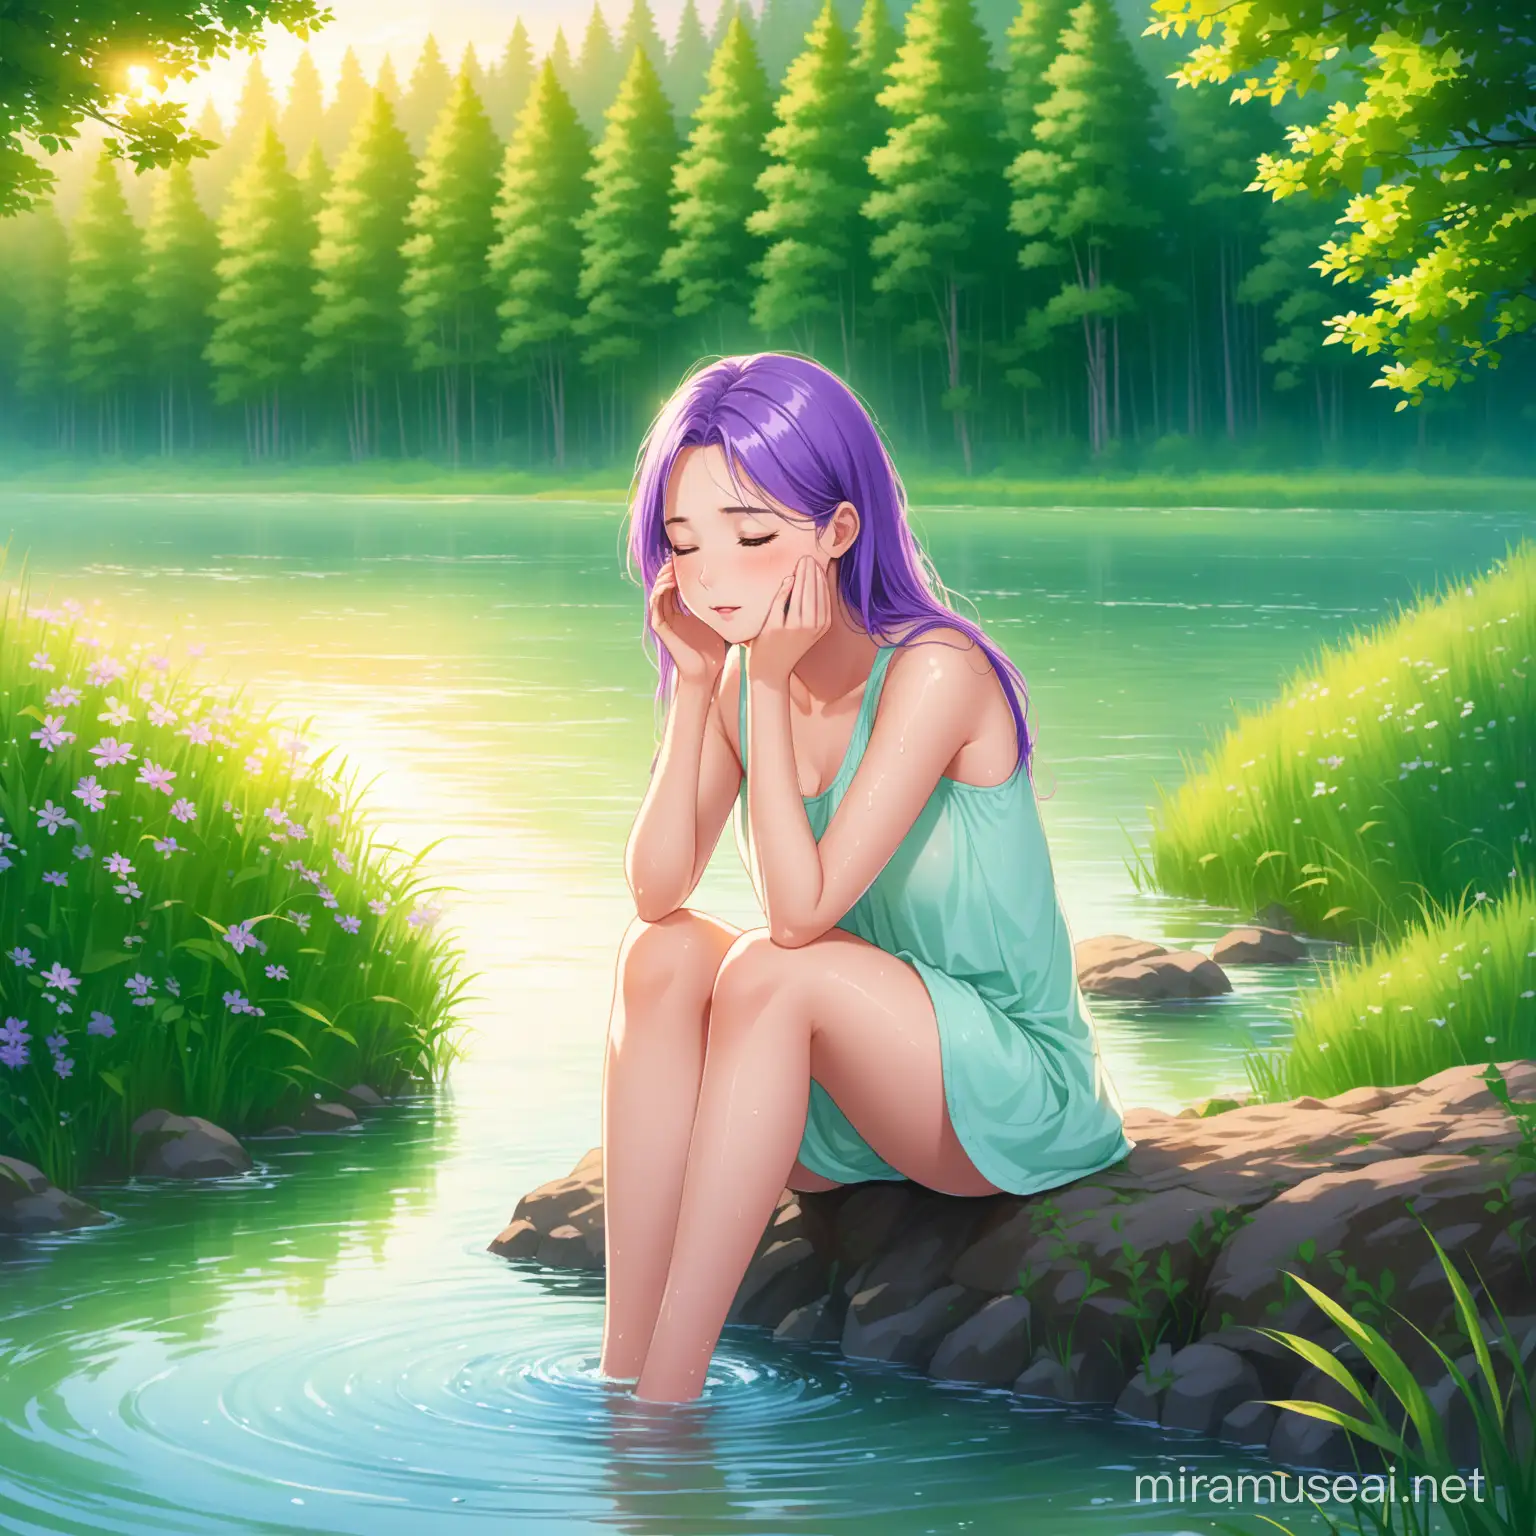 SleepDeprived PurpleHaired Beauty Refreshing by Riverside in Early Spring Forest